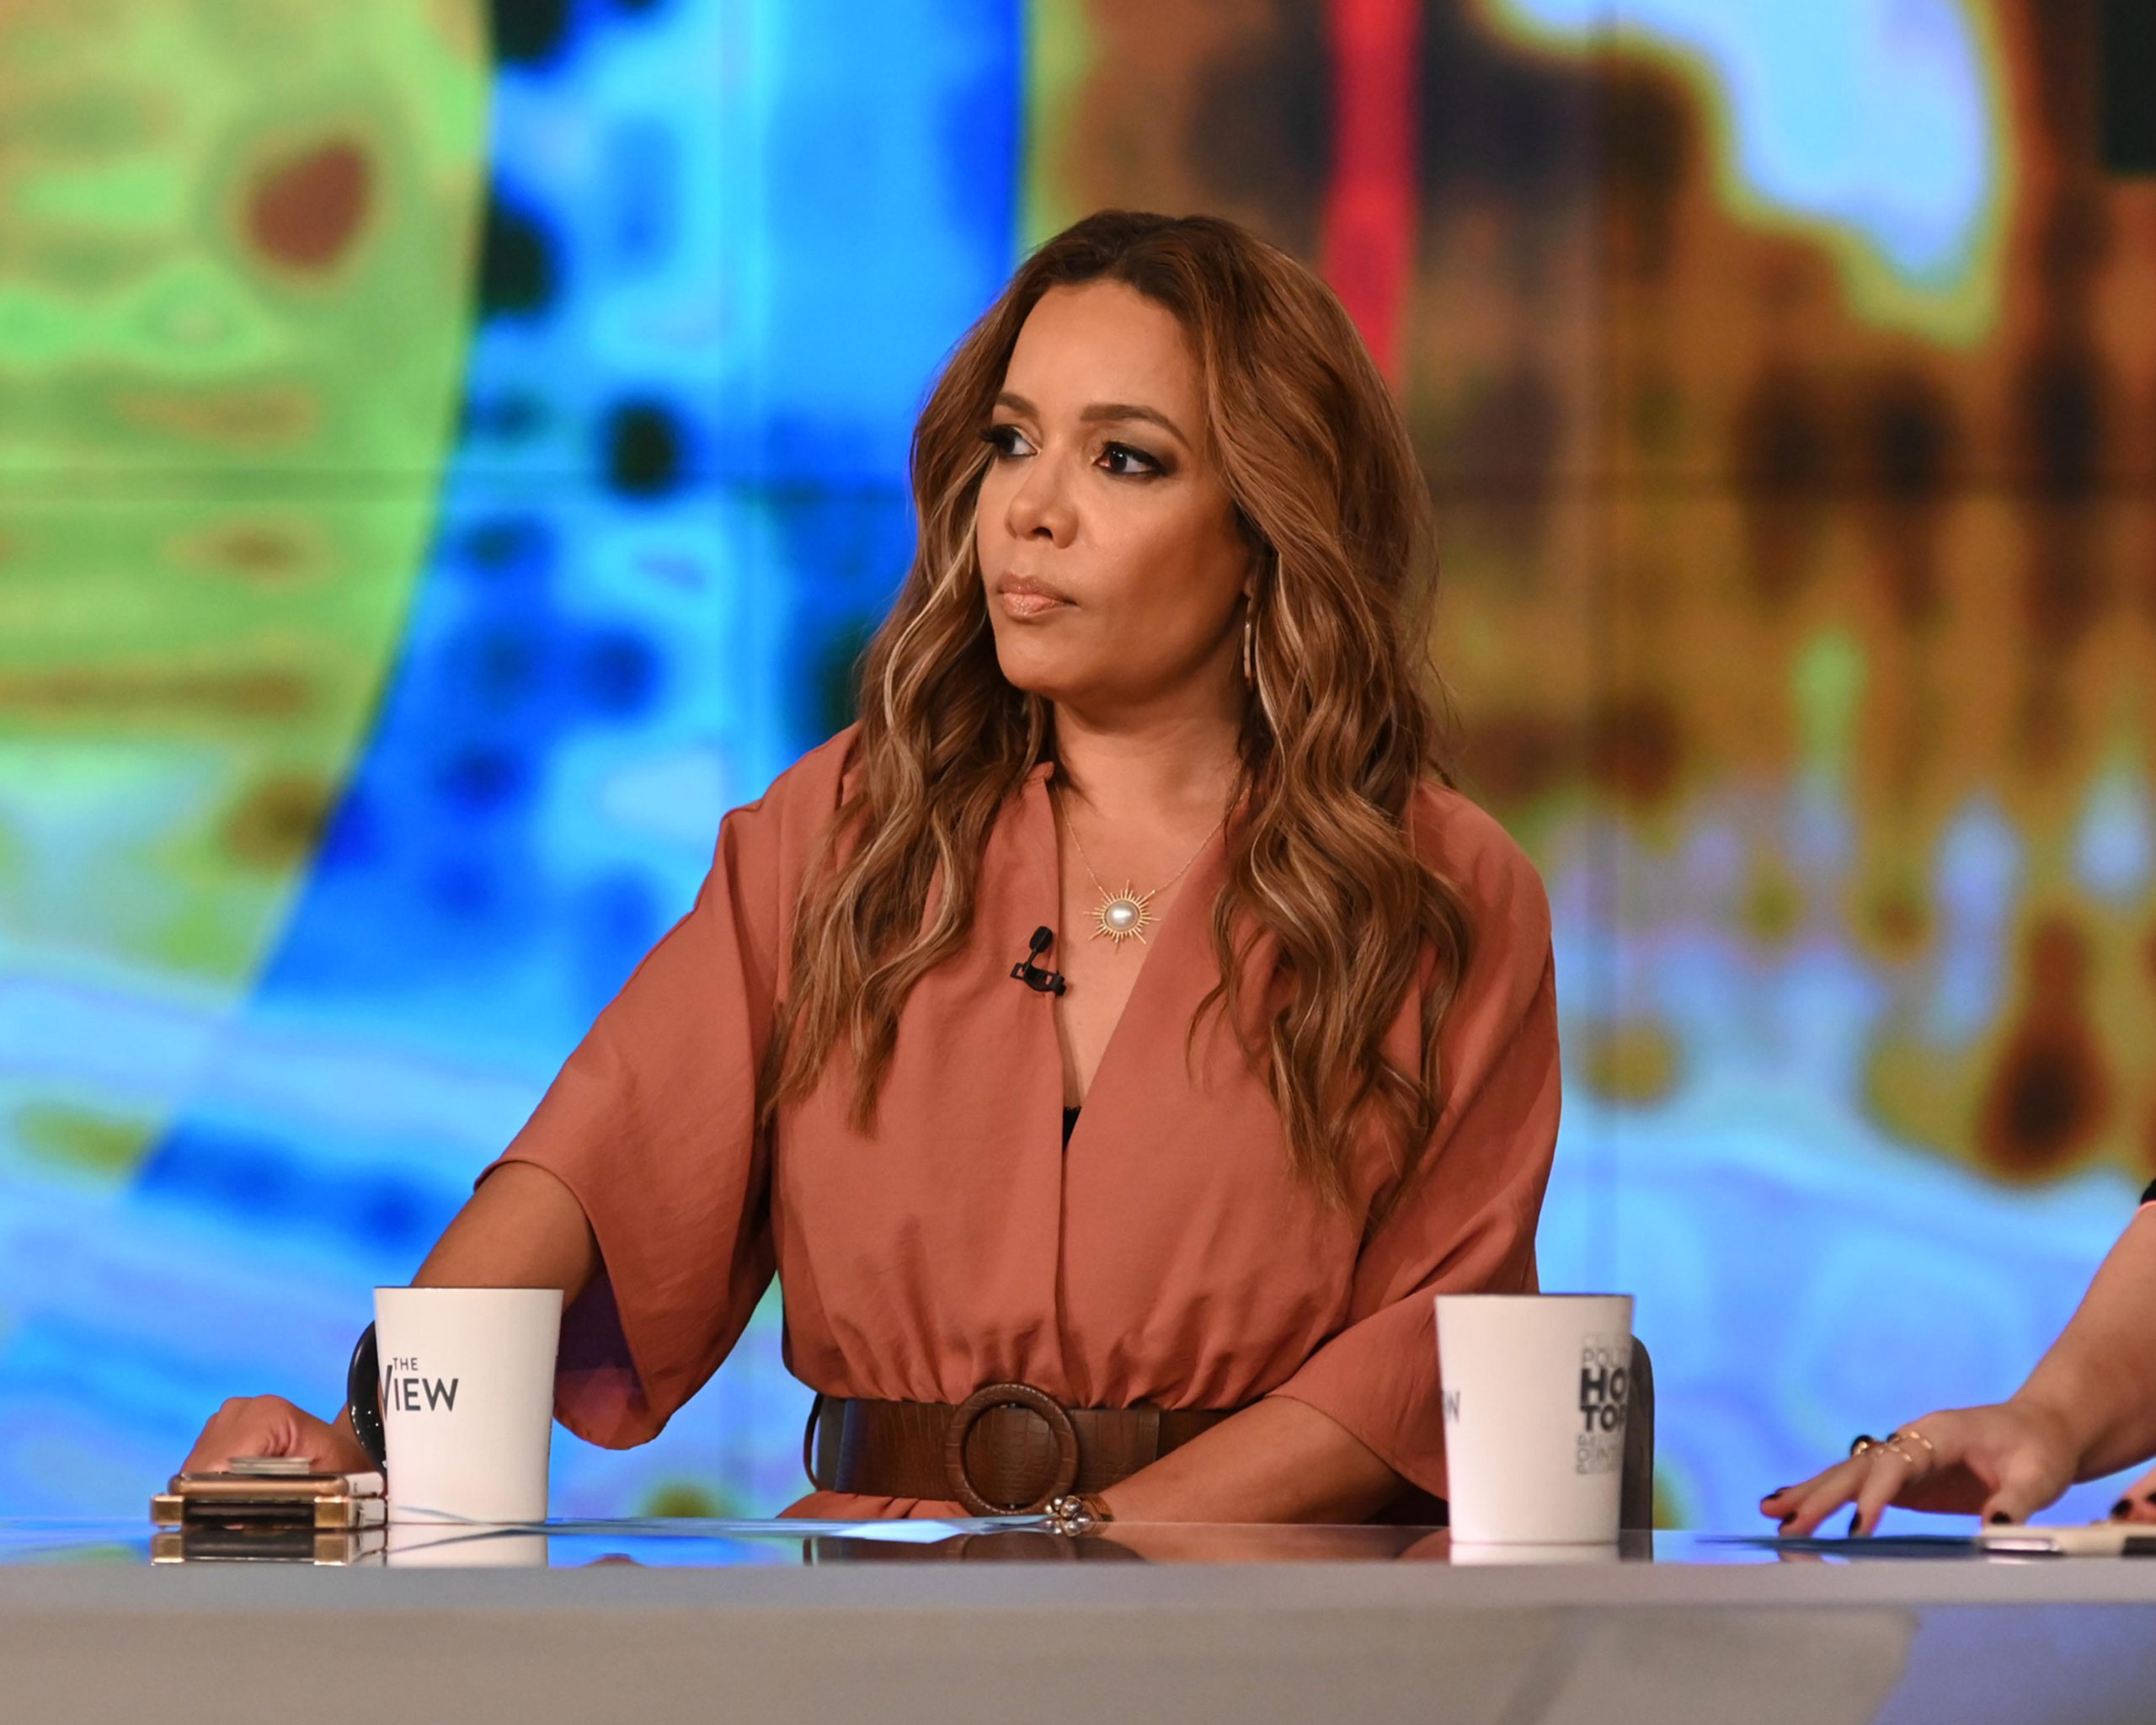 'The View' Star Sunny Hostin Revealed She Didn't Get the 'Fanfare